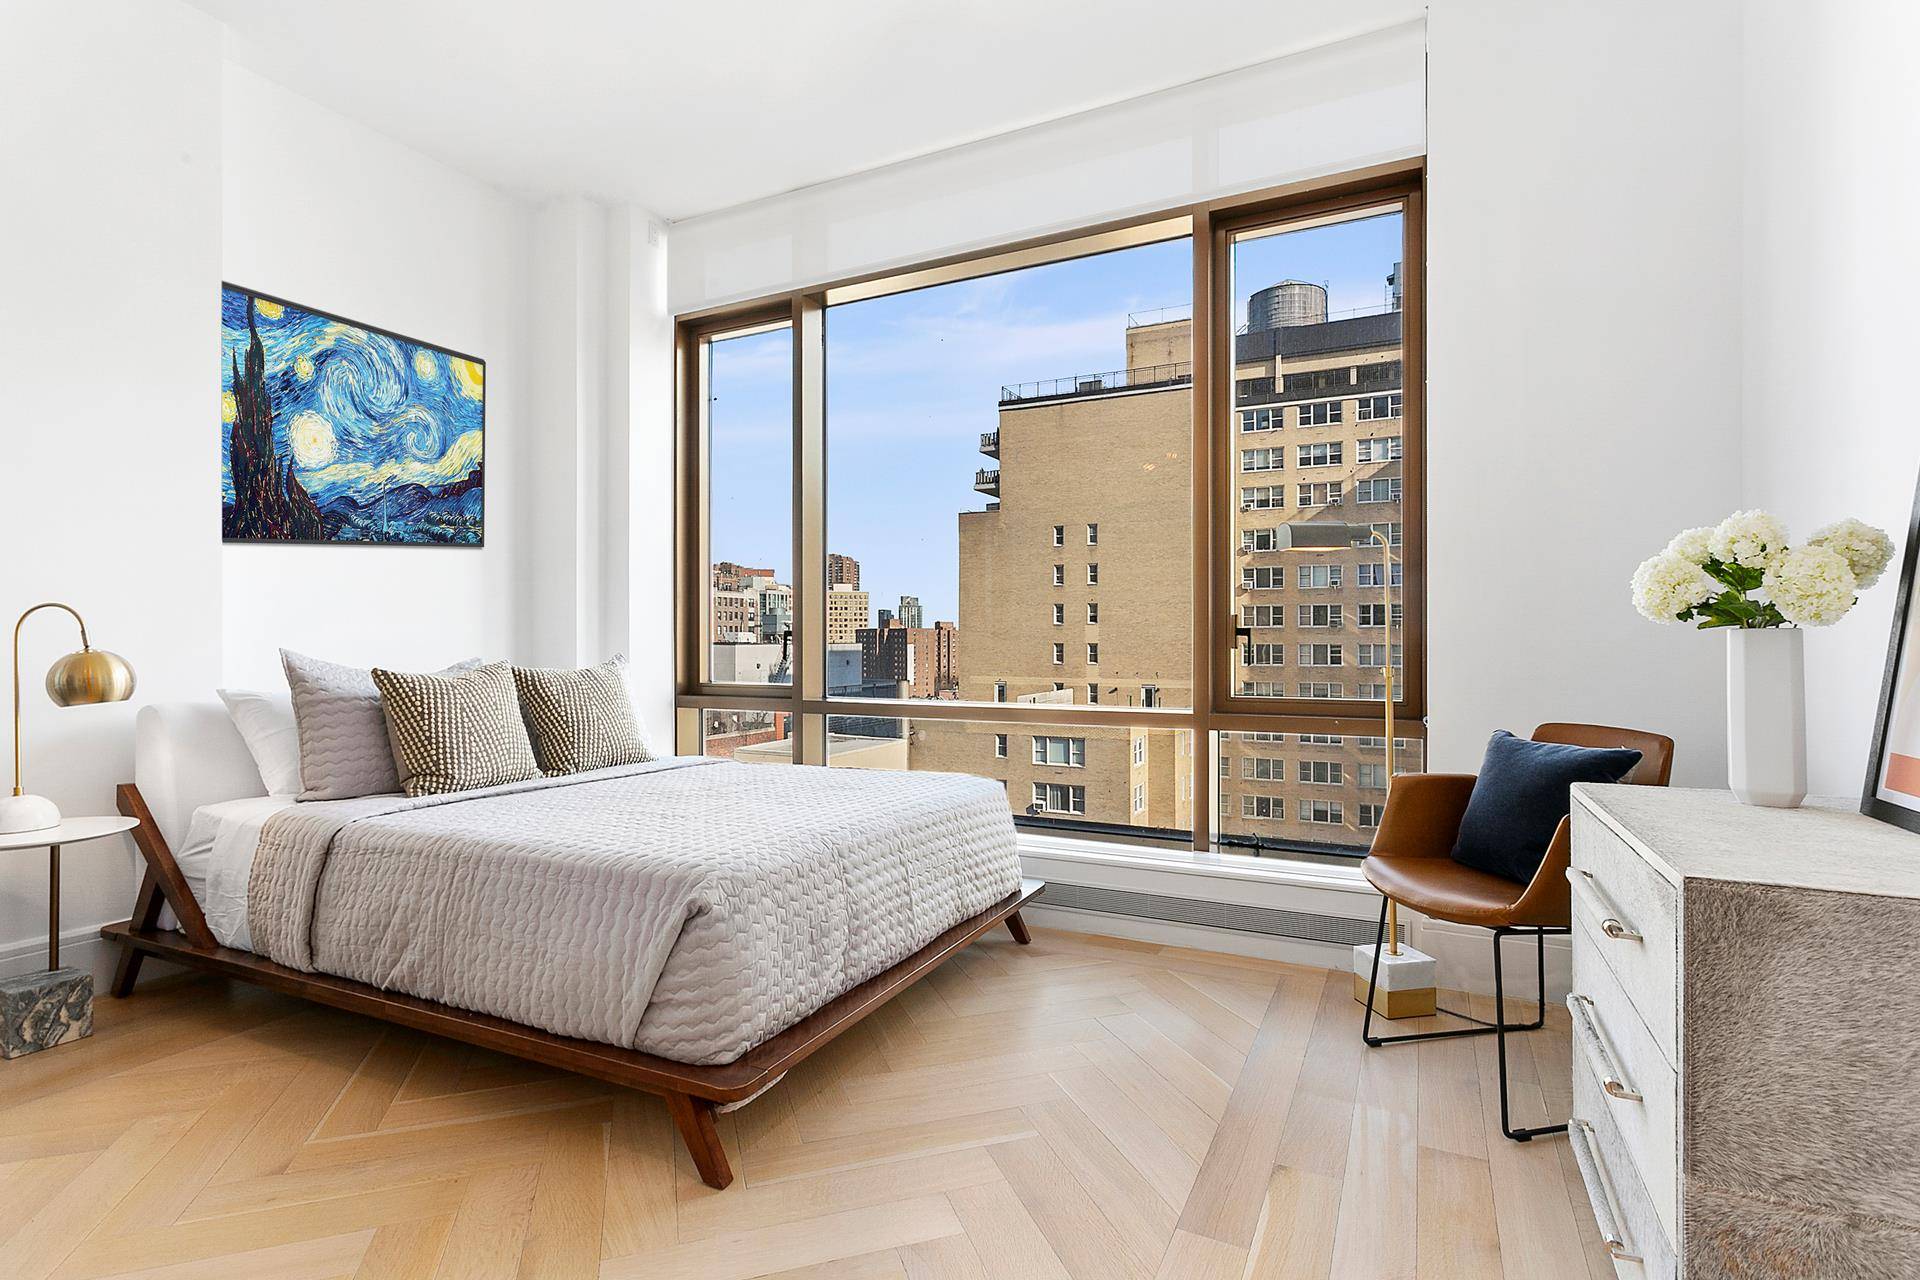 Located at 215 East 19th Street, The Tower offers a distinct collection of 130 loft like residences.